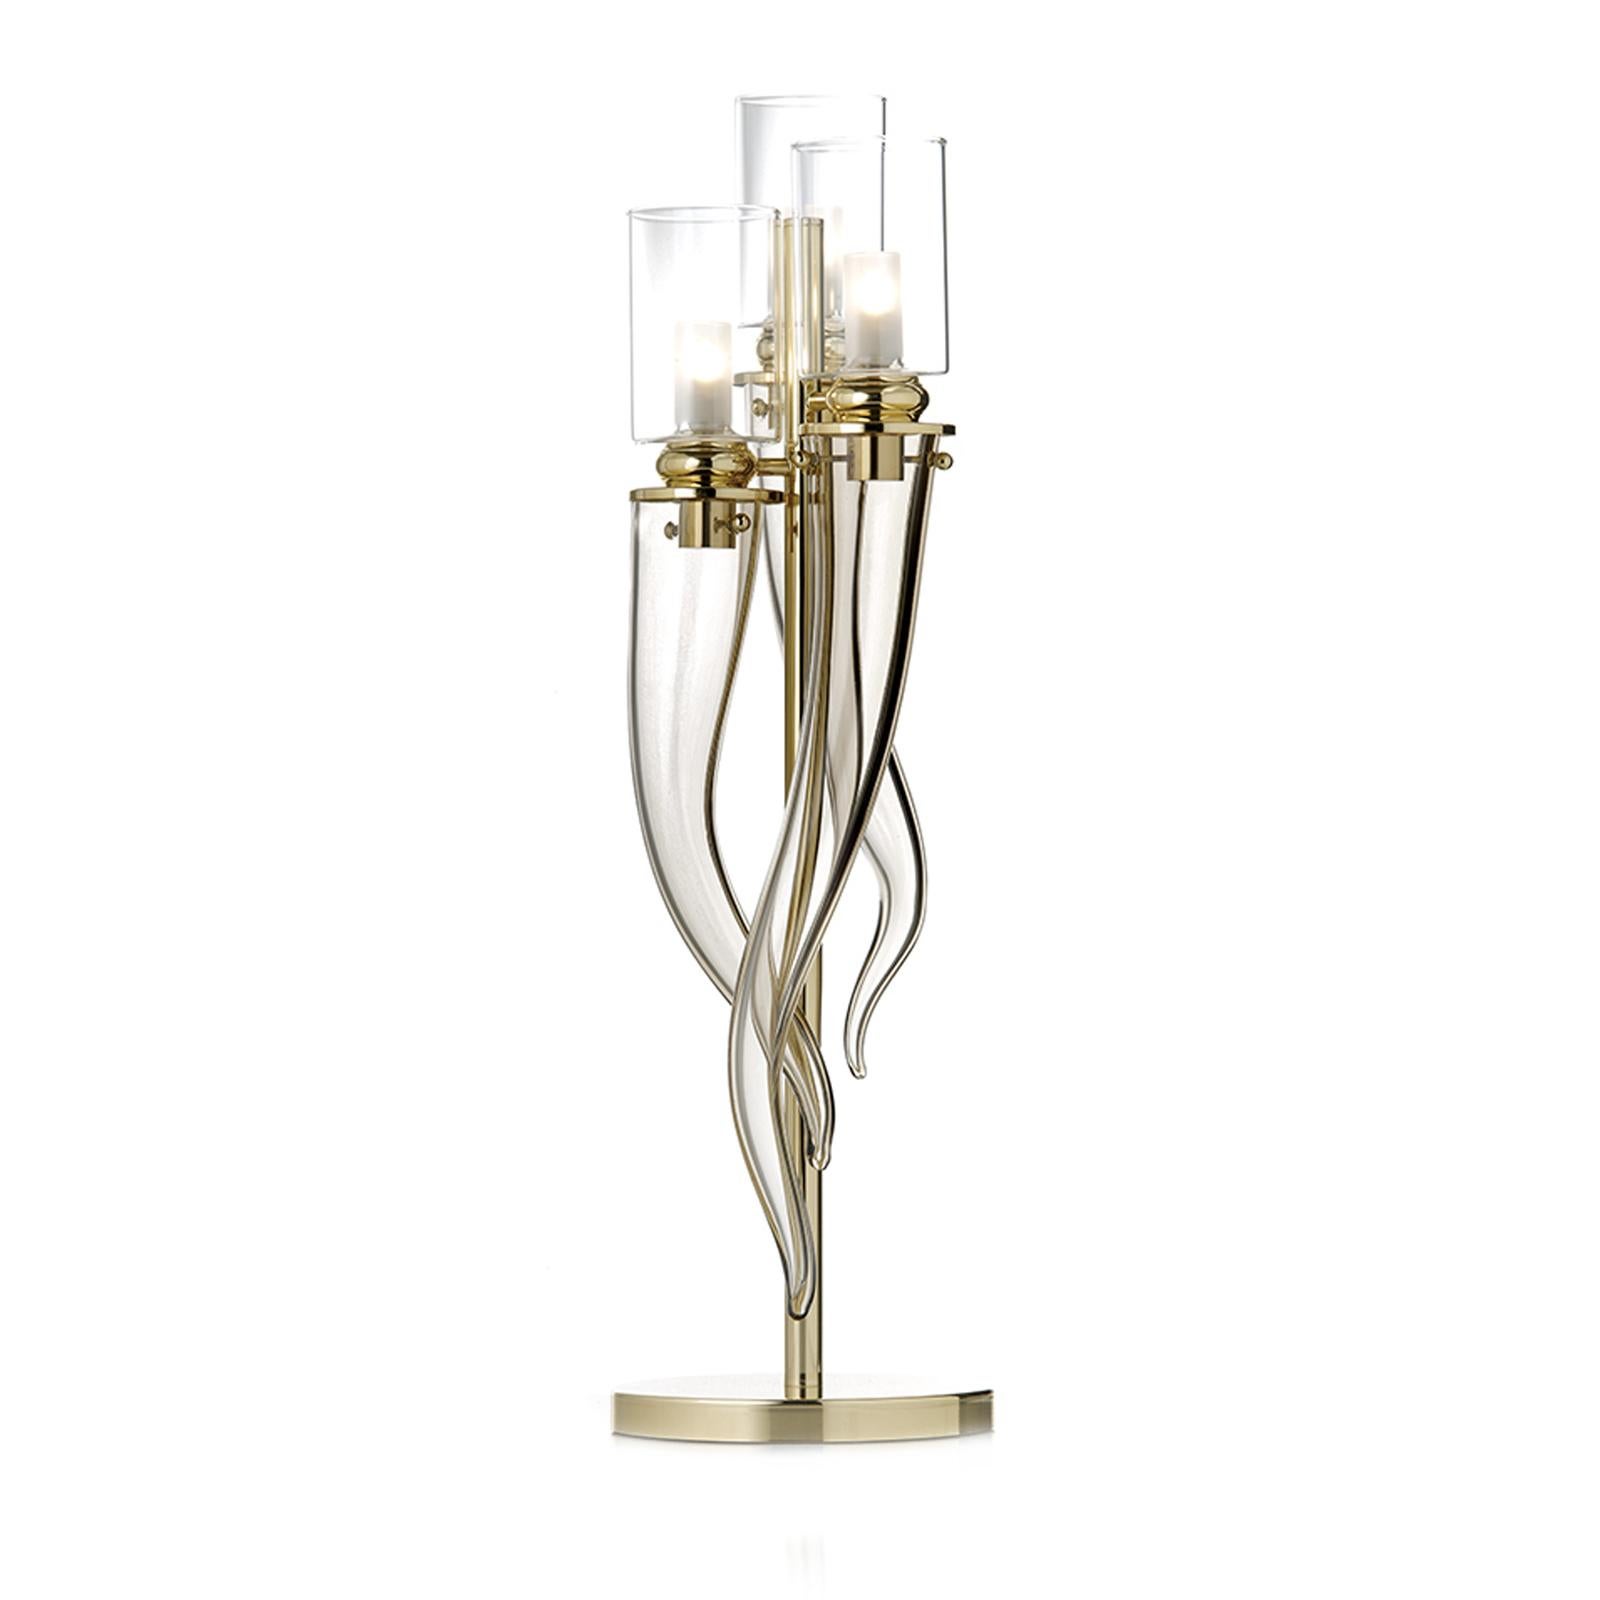 This striking table lamp will be an eye-catching addition to an entrance, a dining table, or a living room. The brushed and lacquered vertical metal structure with gold polish rests on top of a round base and stems vertically to support three